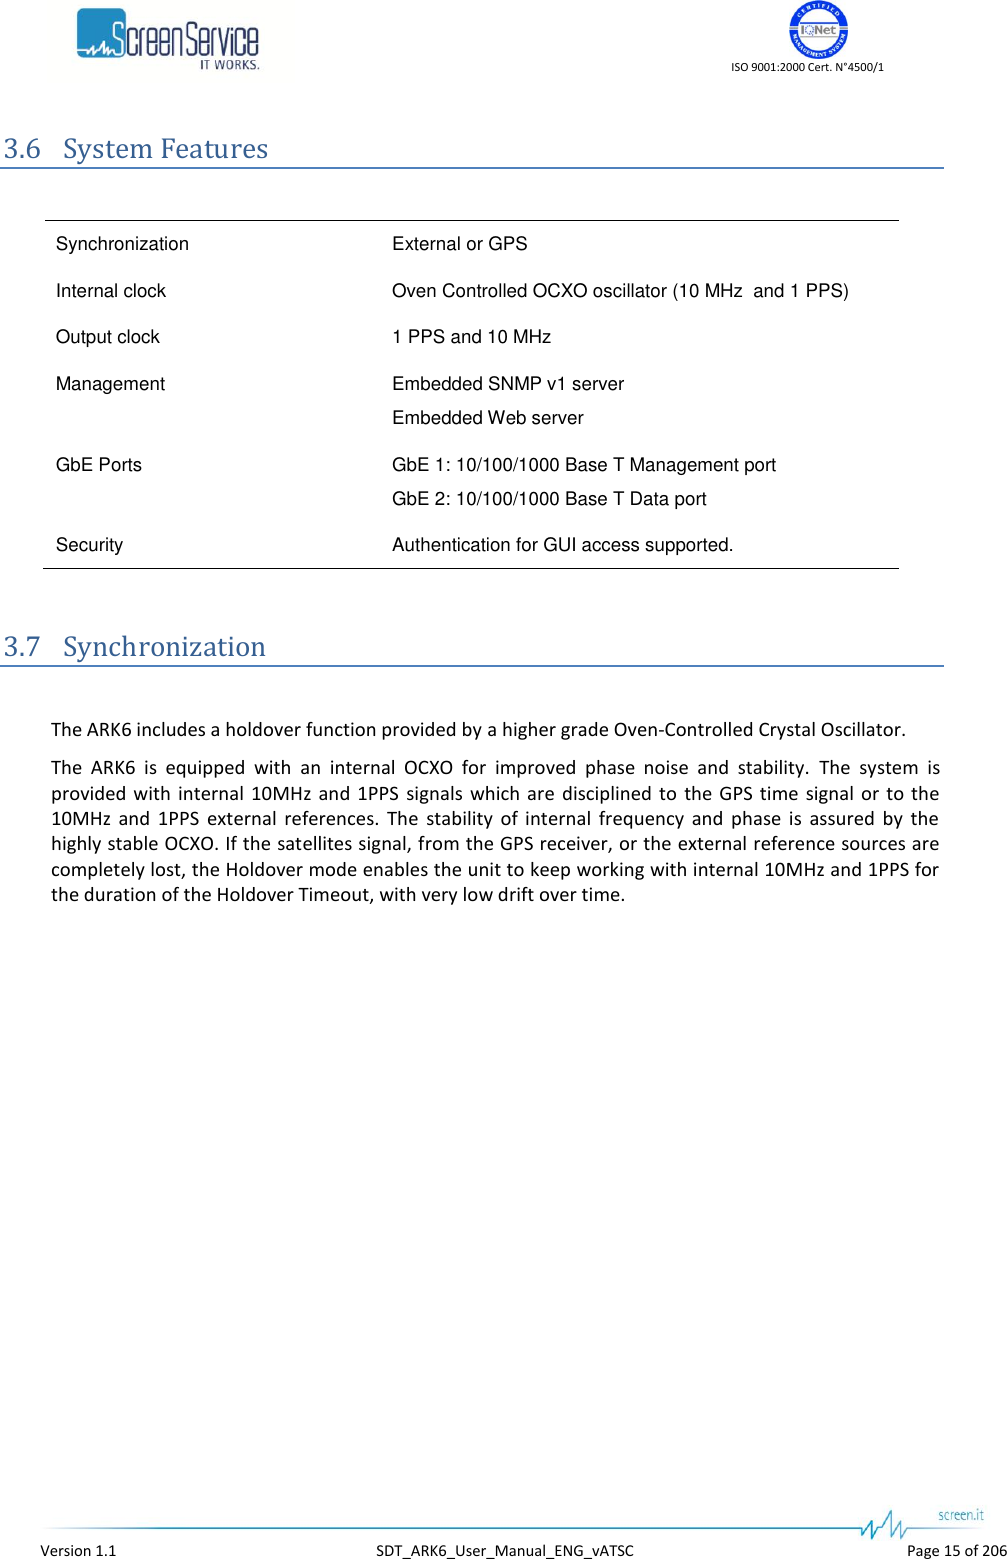    ISO 9001:2000 Cert. N°4500/1   Version 1.1  SDT_ARK6_User_Manual_ENG_vATSC  Page 15 of 206 3.6 System Features  Synchronization External or GPS Internal clock Oven Controlled OCXO oscillator (10 MHz  and 1 PPS) Output clock 1 PPS and 10 MHz Management Embedded SNMP v1 server Embedded Web server GbE Ports GbE 1: 10/100/1000 Base T Management port GbE 2: 10/100/1000 Base T Data port Security Authentication for GUI access supported.  3.7 Synchronization  The ARK6 includes a holdover function provided by a higher grade Oven-Controlled Crystal Oscillator. The  ARK6  is  equipped  with  an  internal  OCXO  for  improved  phase  noise  and  stability.  The  system  is provided  with  internal 10MHz  and  1PPS  signals  which are  disciplined to  the GPS time signal  or to the 10MHz  and  1PPS  external  references.  The  stability  of  internal  frequency  and  phase  is  assured  by  the highly stable OCXO. If the satellites signal, from the GPS receiver, or the external reference sources are completely lost, the Holdover mode enables the unit to keep working with internal 10MHz and 1PPS for the duration of the Holdover Timeout, with very low drift over time.  